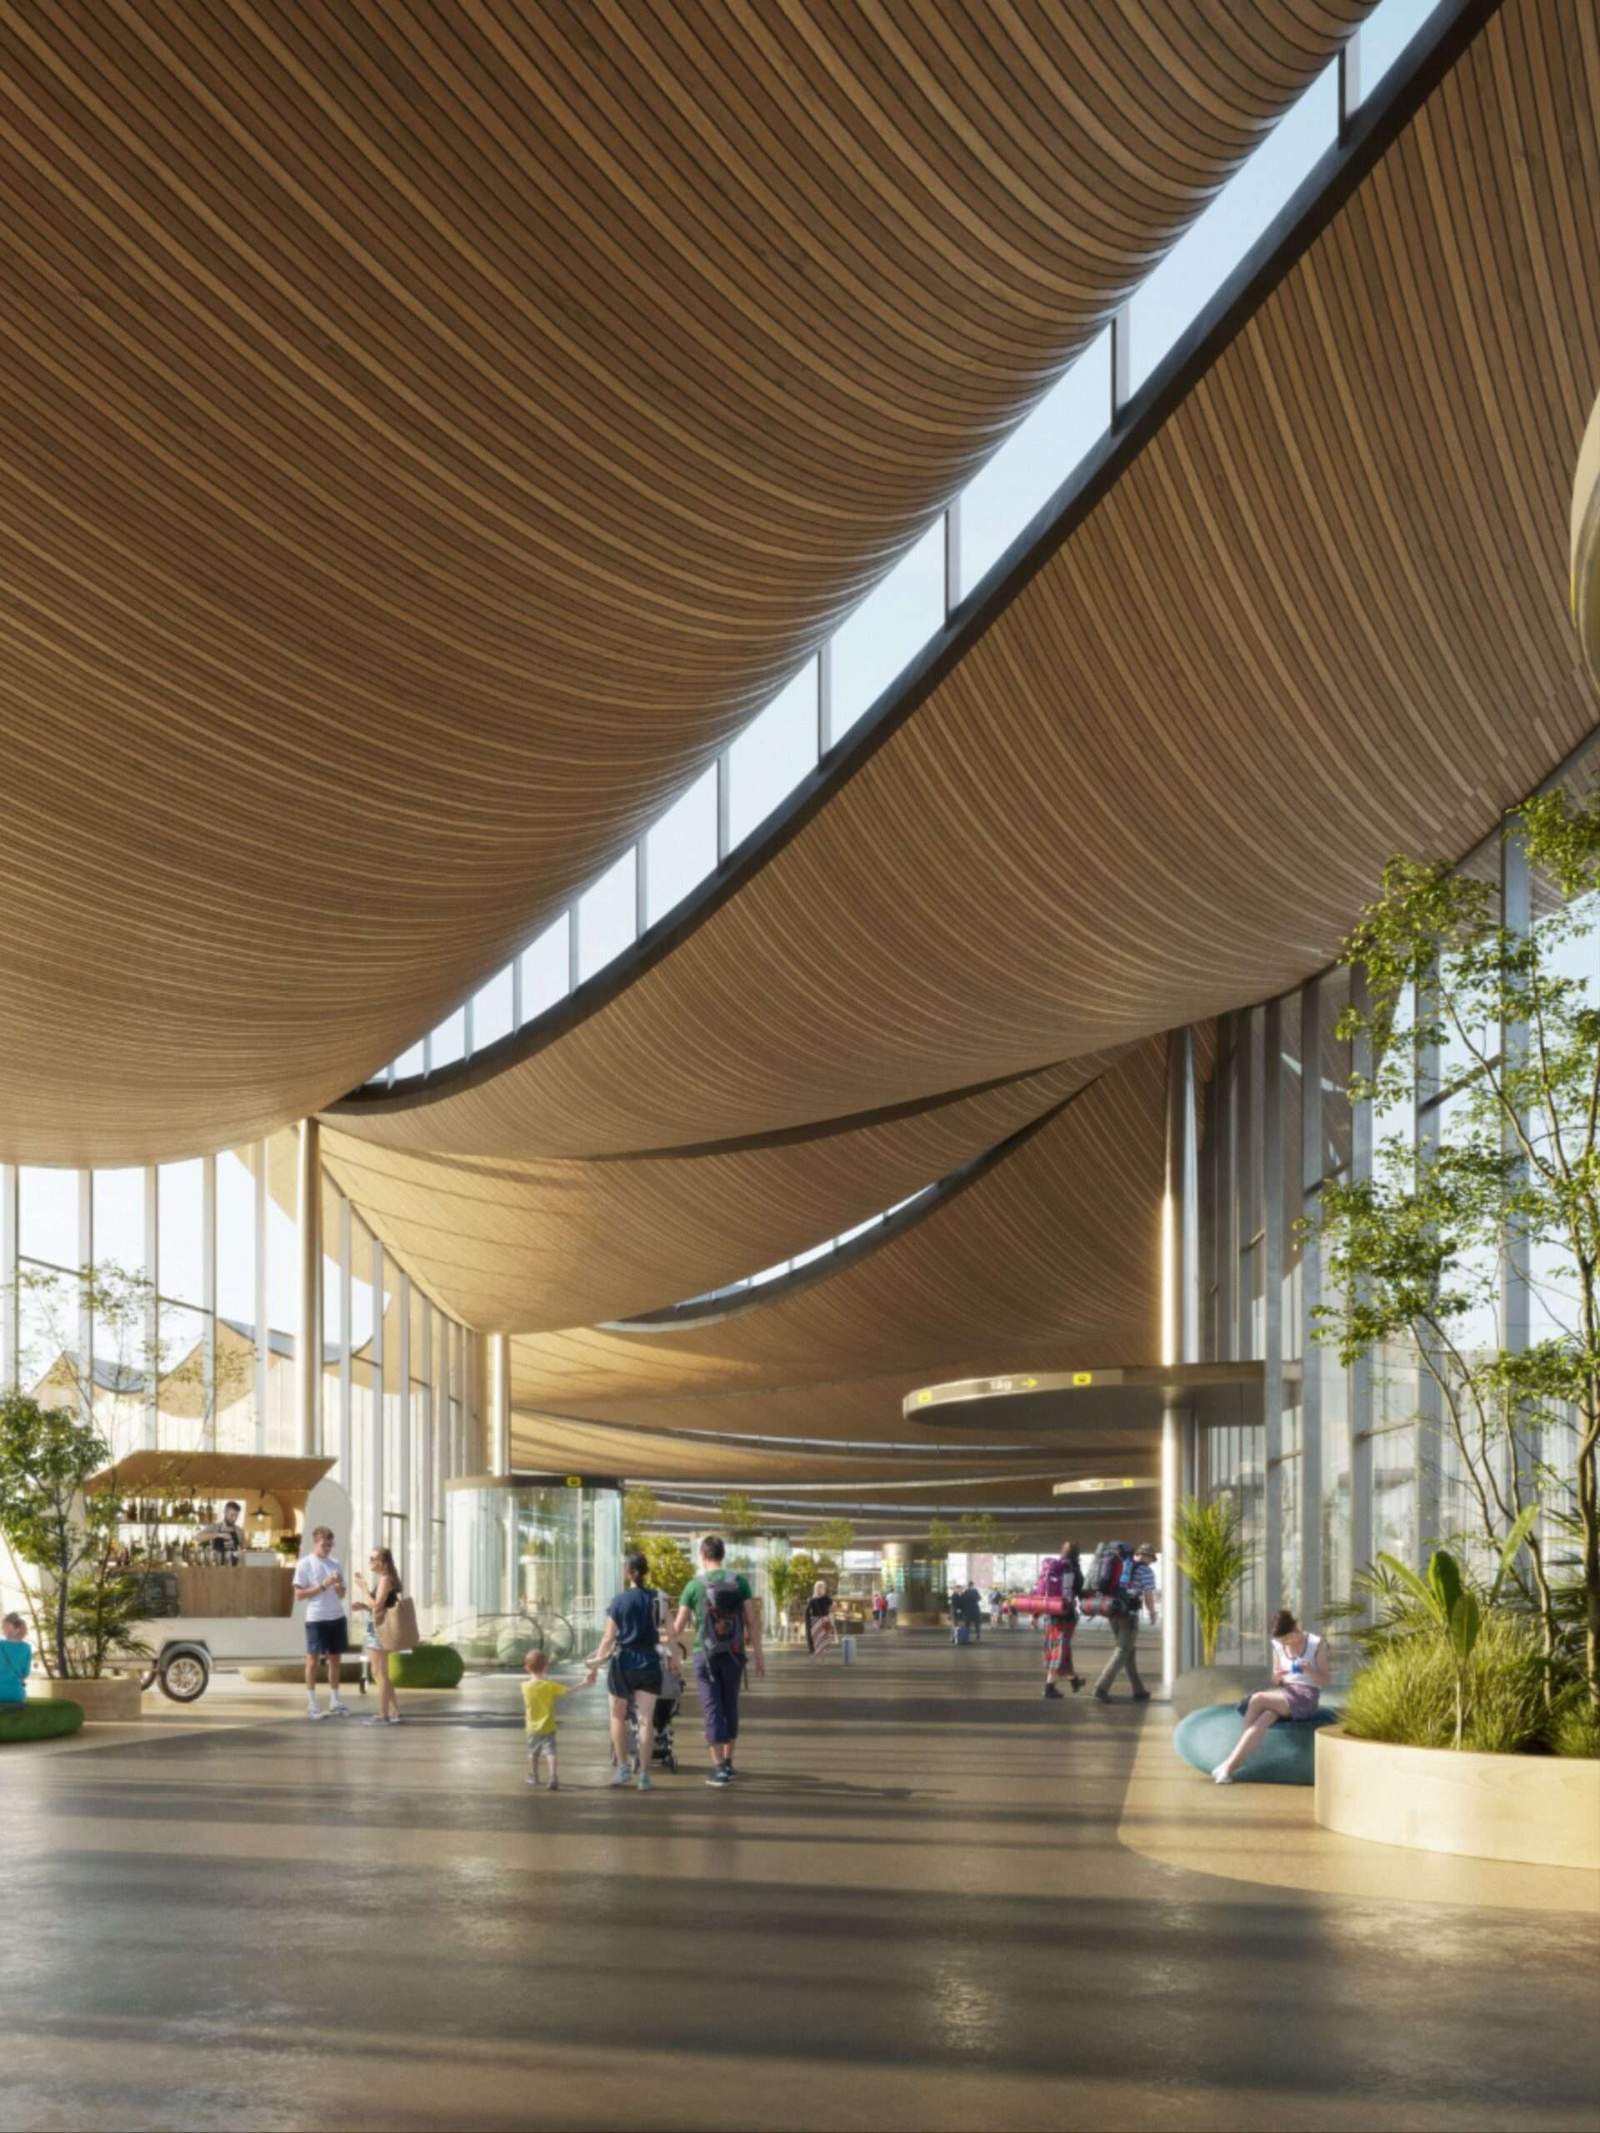 Striking timber roof with sweeping curves defines BIG proposal for Västerås Travel Centre in Sweden